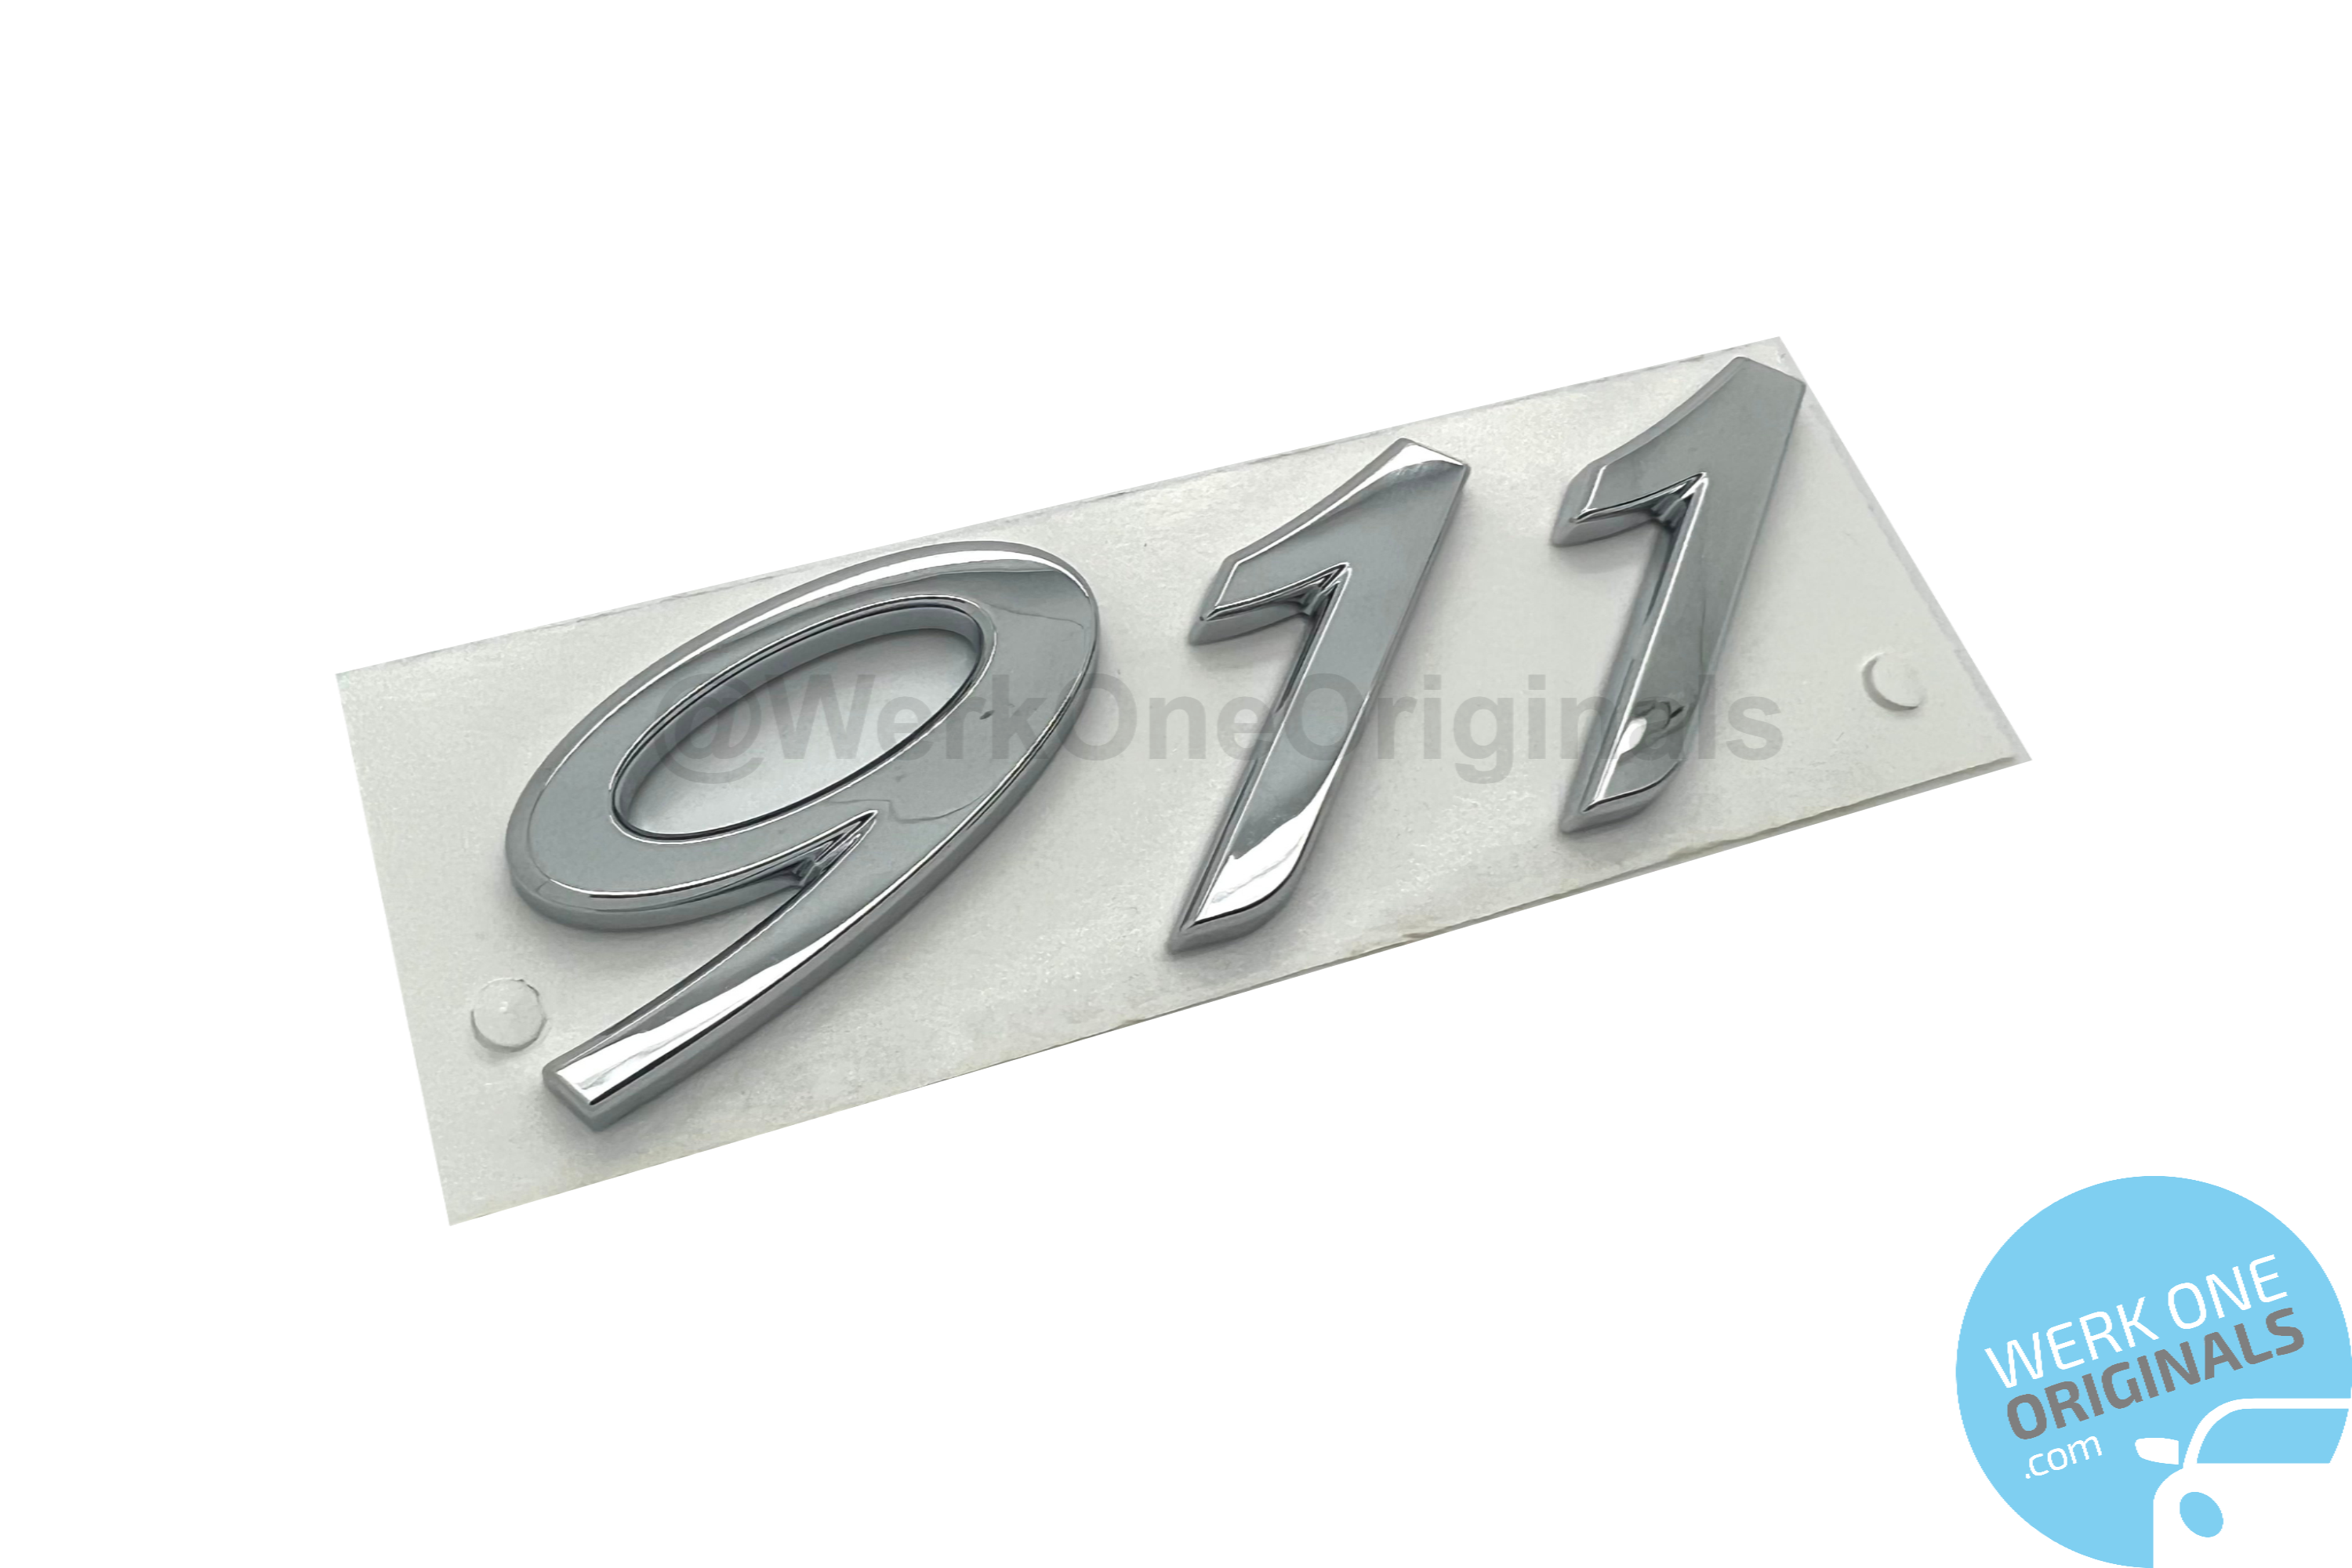 Porsche Official '911' Rear Badge Decal in Chrome Silver for 911 Type 996 Models